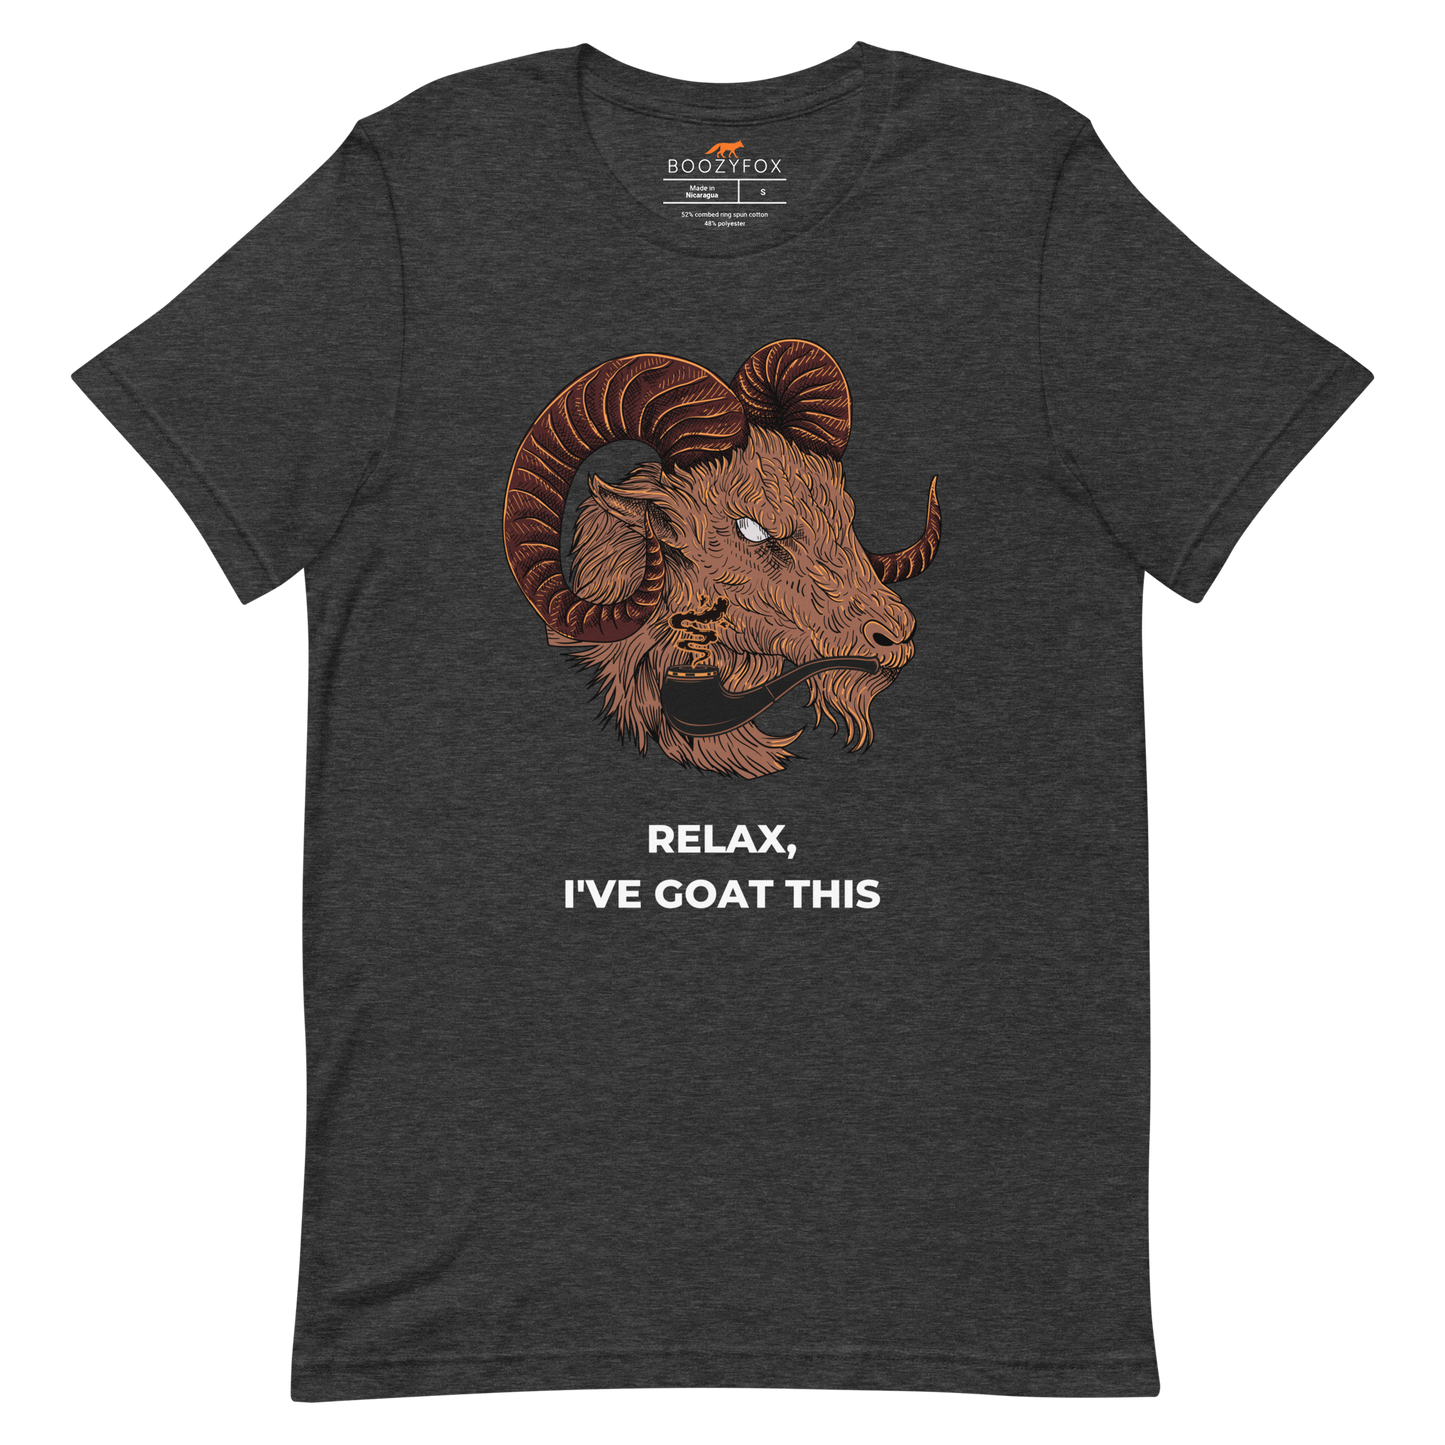 Dark Grey Heather Premium Goat T-Shirt featuring an amusing Relax I've Goat This graphic on the chest - Funny Graphic Goat Tees - Boozy Fox